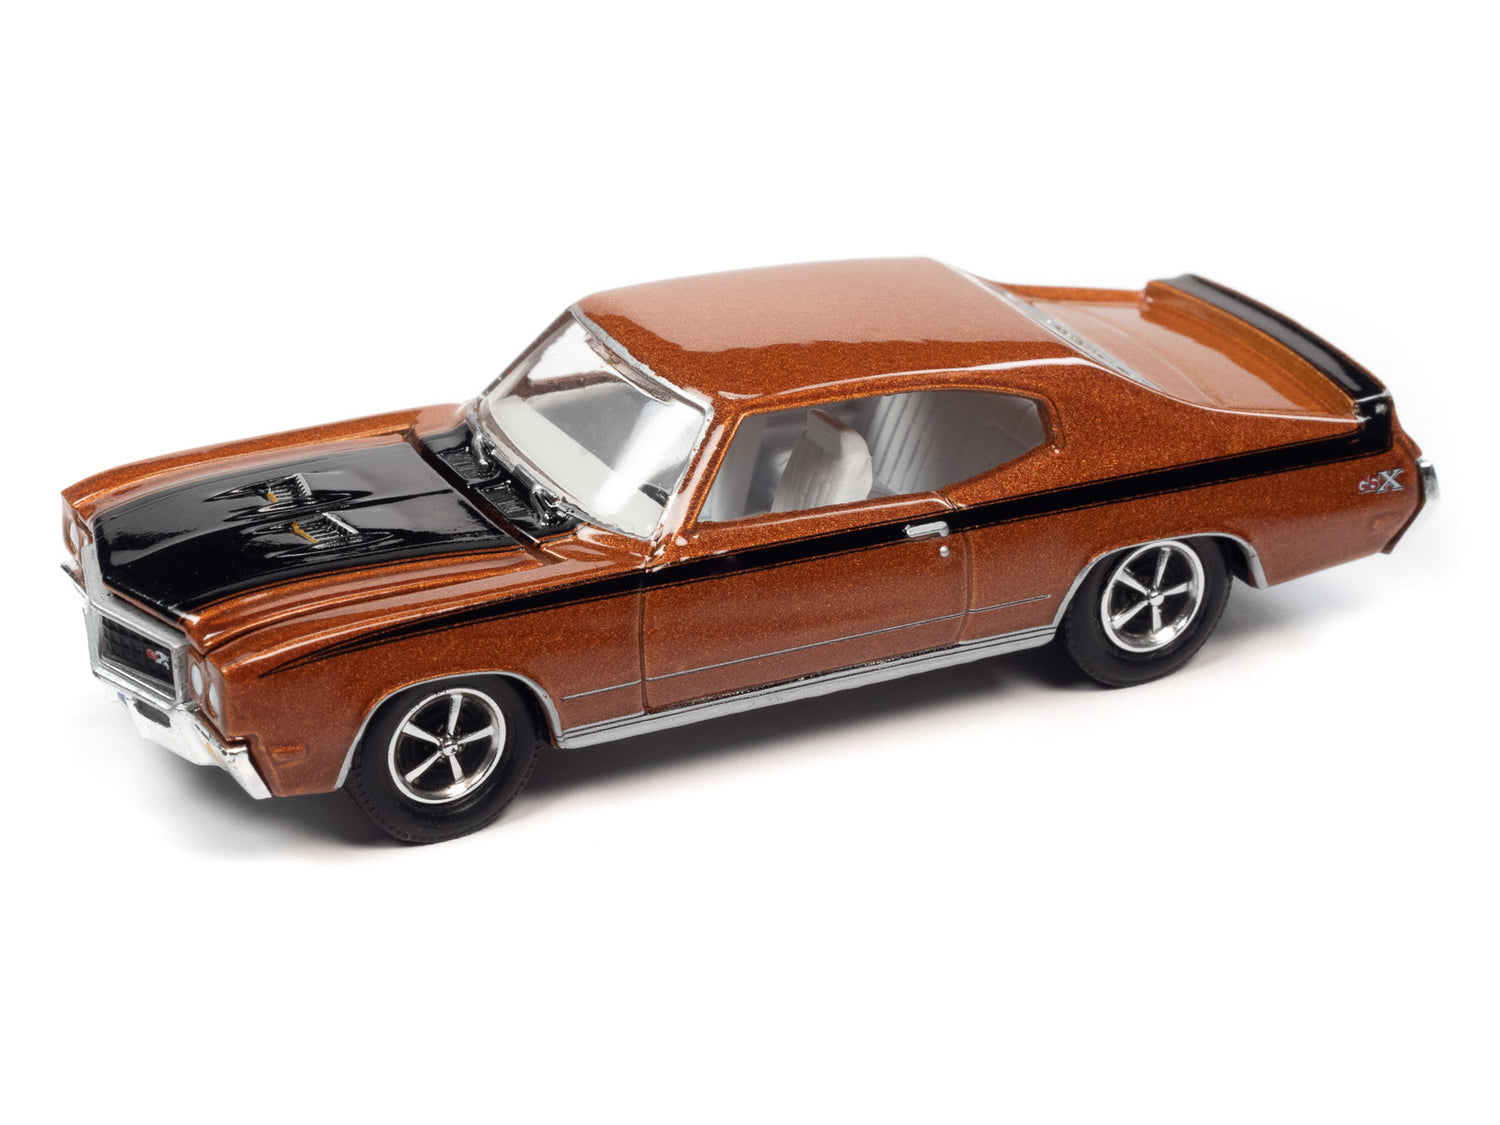 Racing Champions 1970 Buick GSX 1:64 Scale Diecast